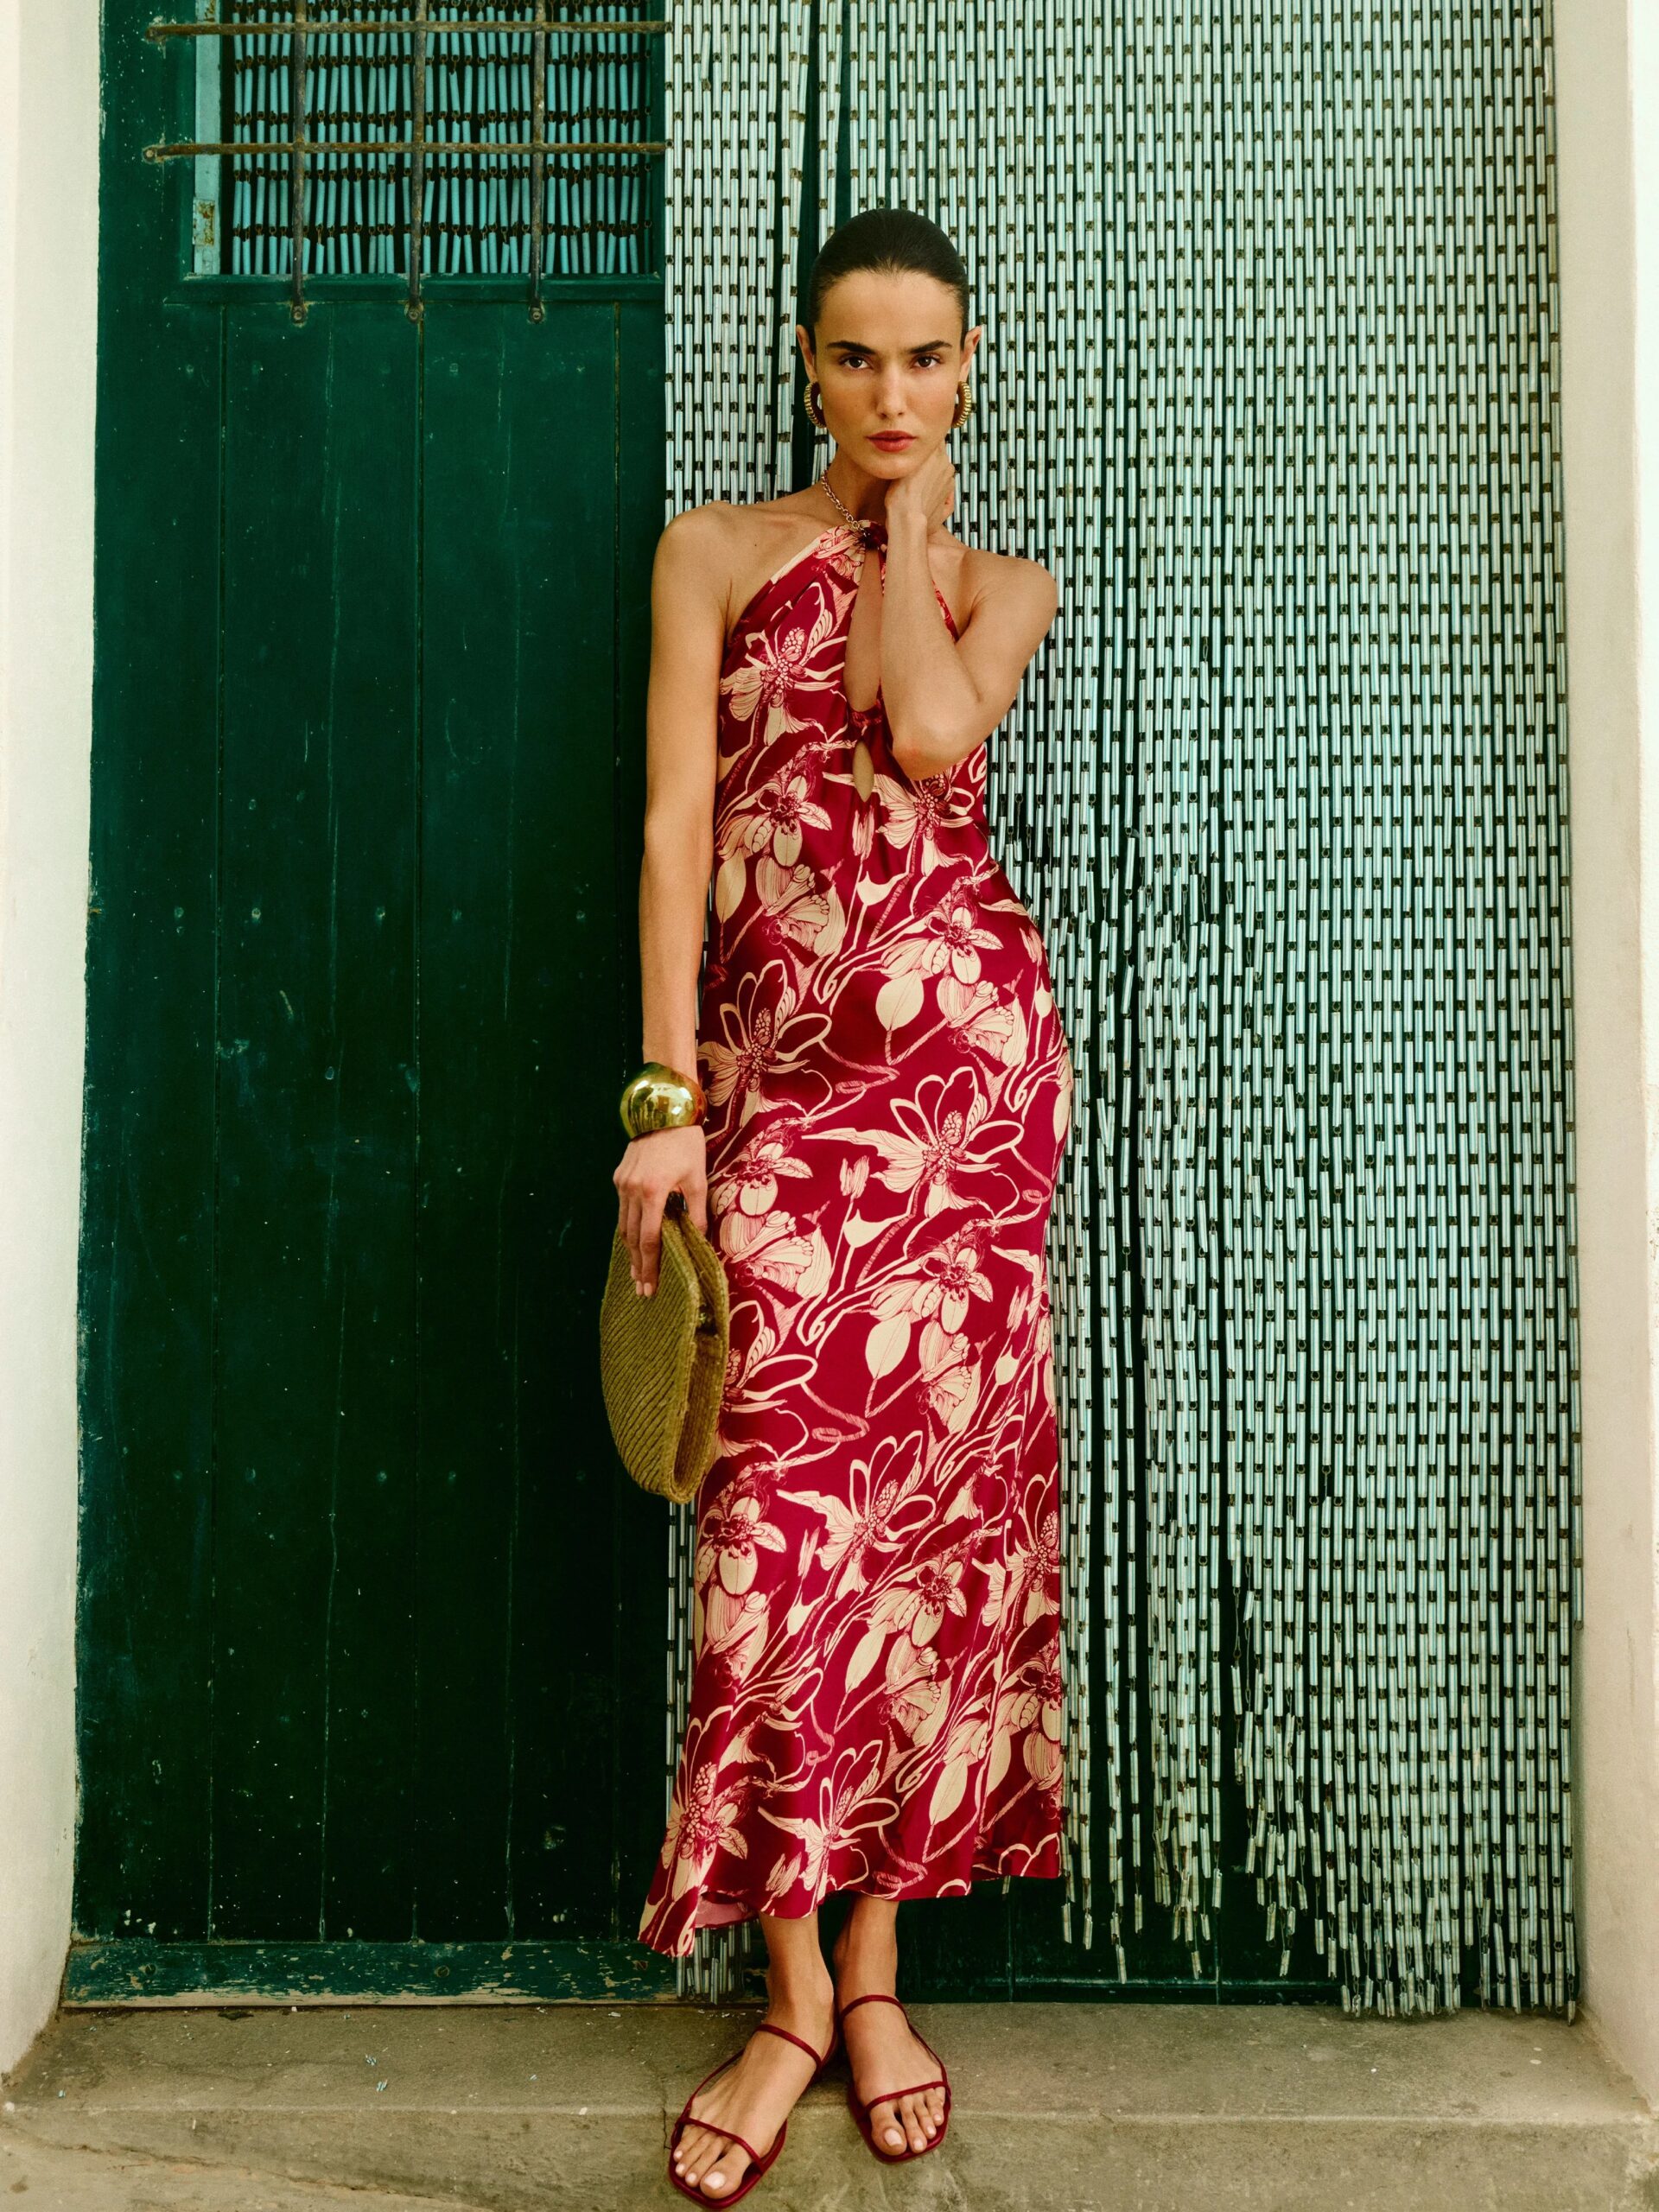 A woman in a patterned, sleeveless dress stands against a green door, holding a woven handbag and wearing bracelets.